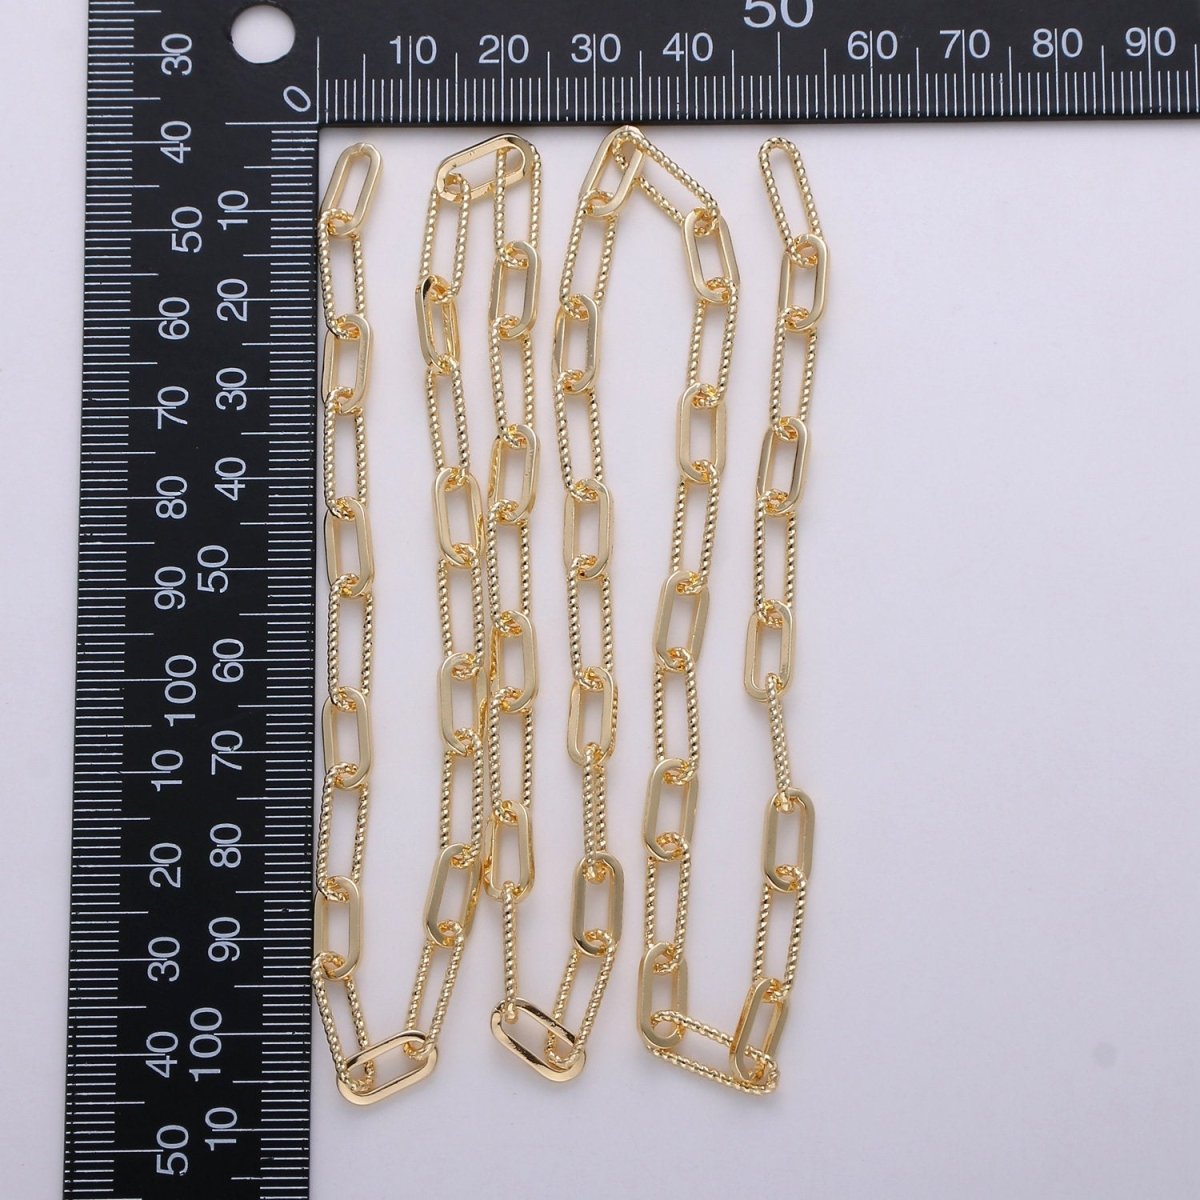 Paperclip Chain Necklace, 16K Gold Filled, Long Oval Paper Clip Chain 2x4mm, Nickel Free Unfinished Link Chain | ROLL-270 Clearance Pricing - DLUXCA